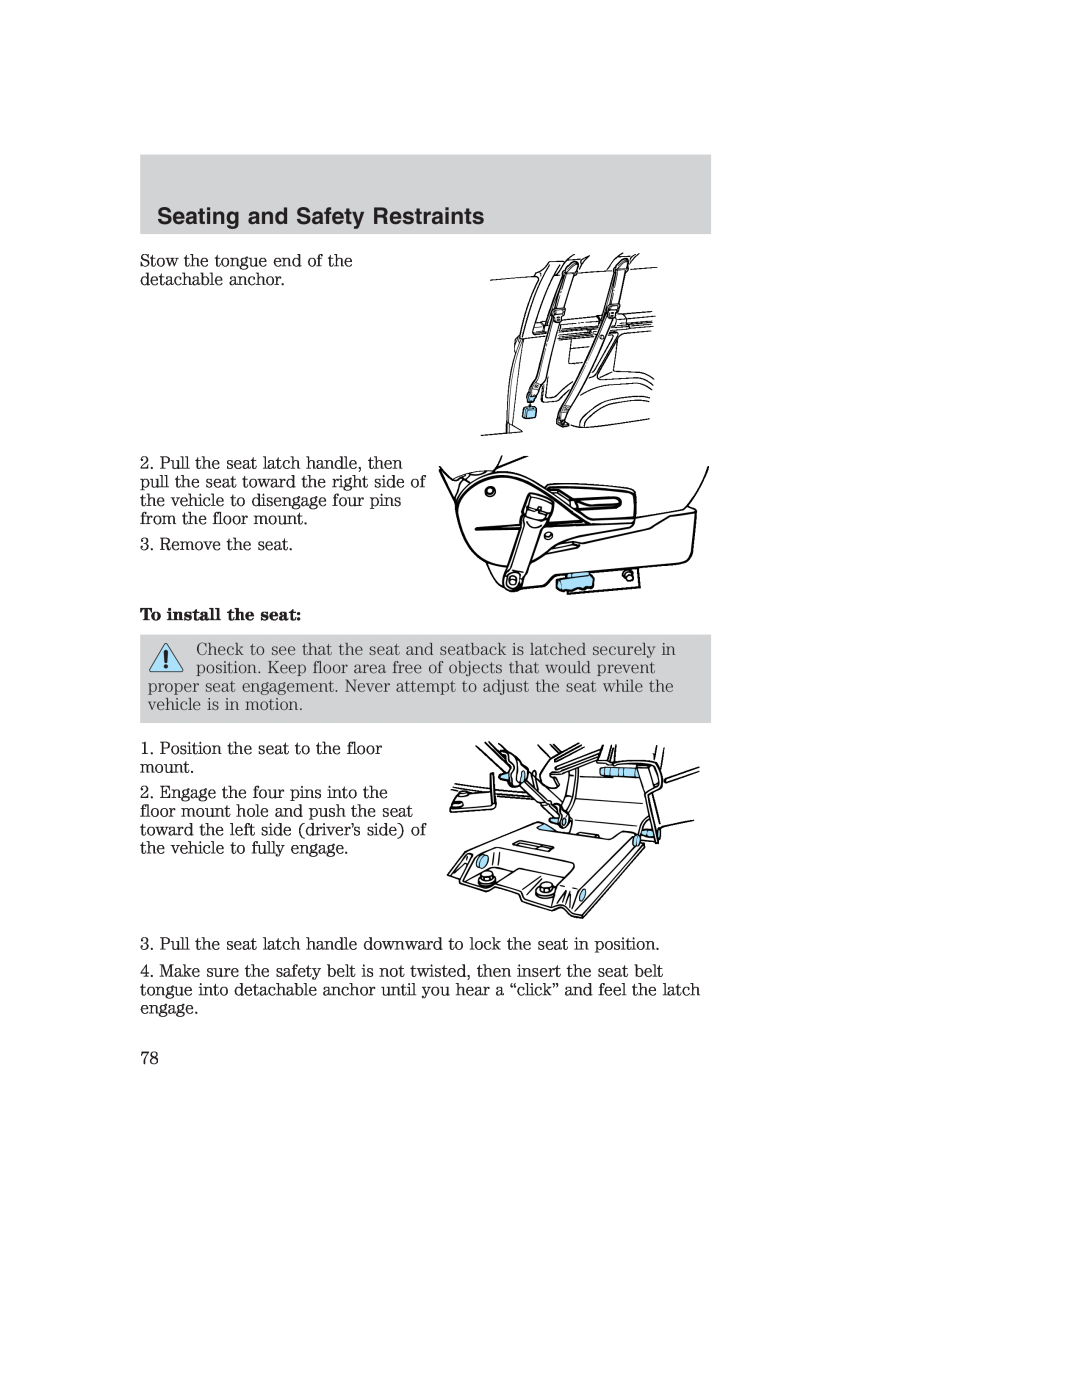 Ford AM/FM stereo manual To install the seat, Seating and Safety Restraints 